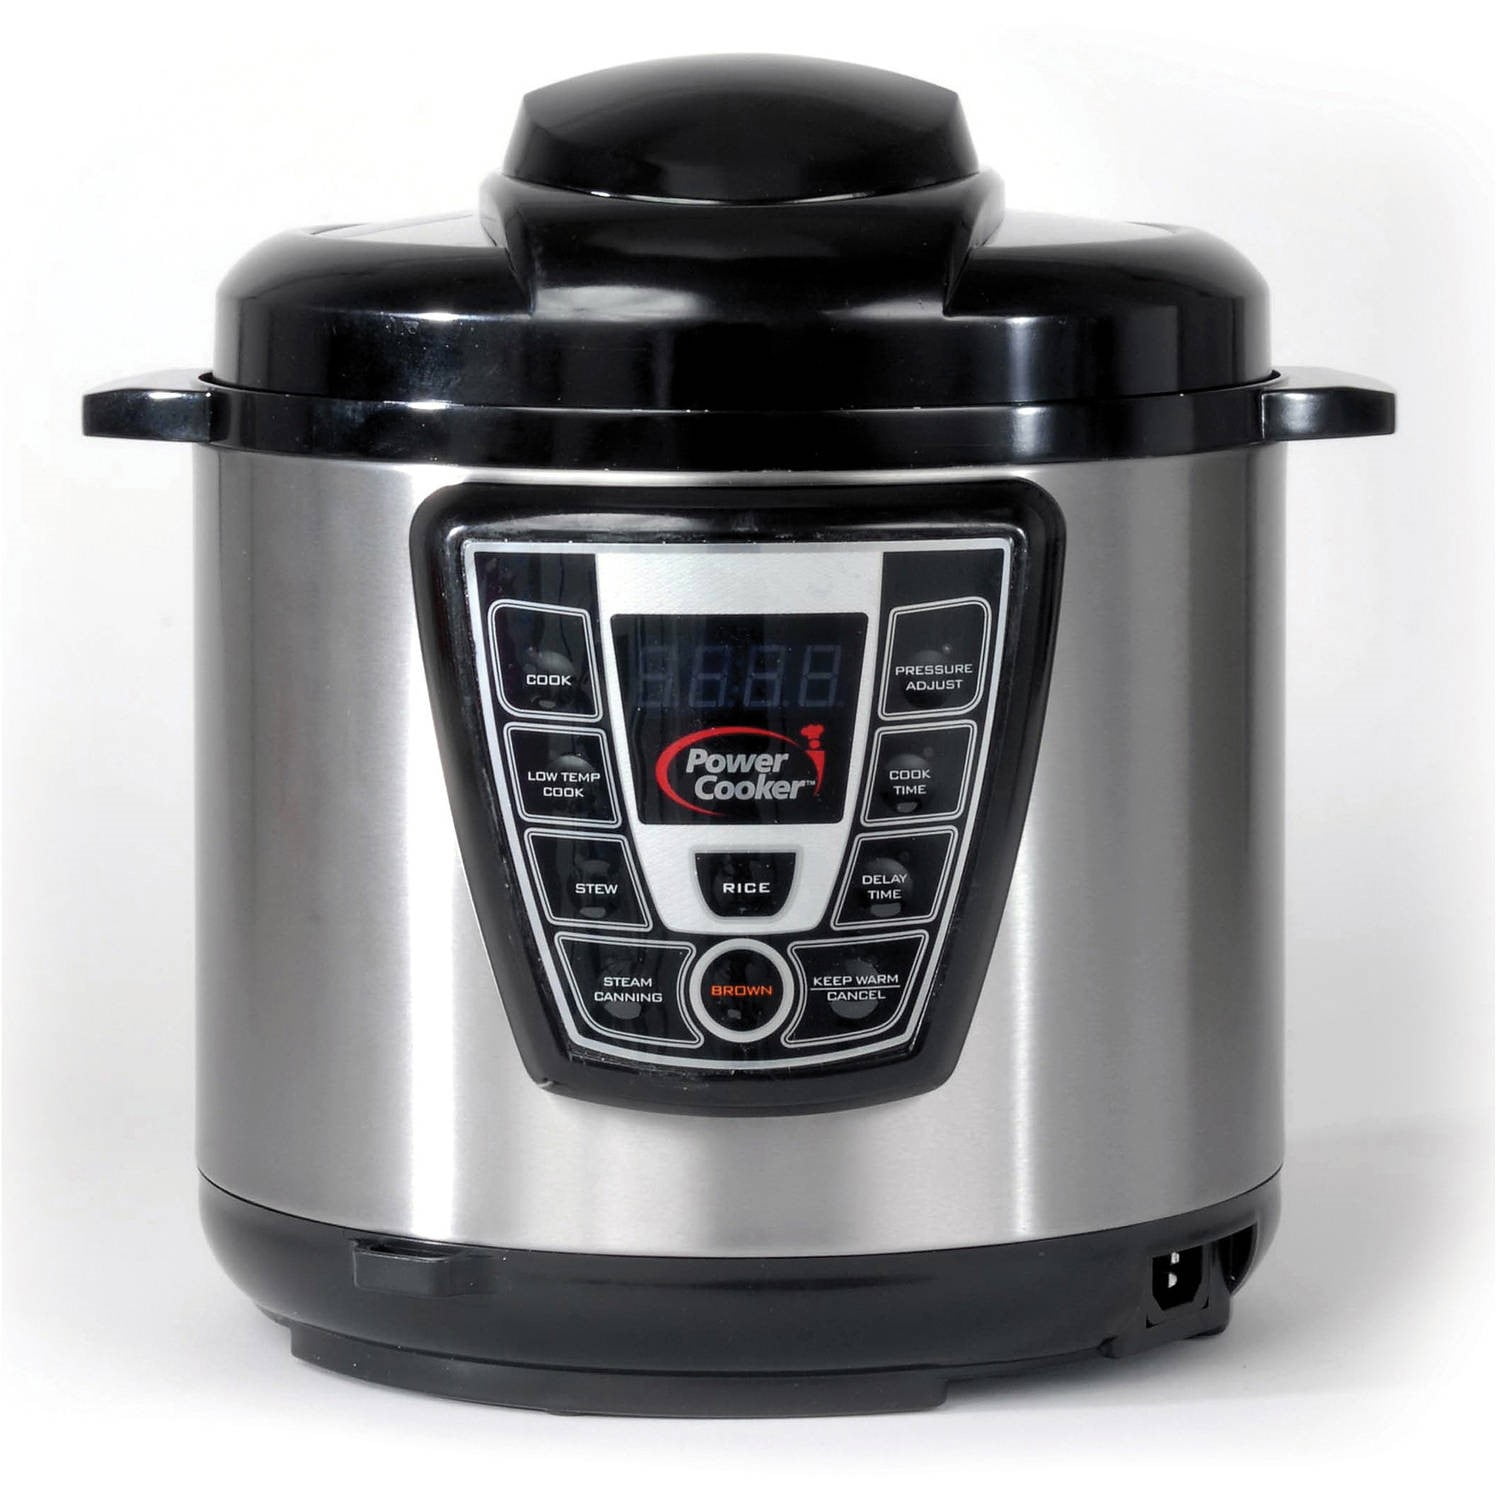 Power Quick Pot 6 Quart Pressure Cooker 1200w 8 In 1 Multicooker Y6D—36  Tested